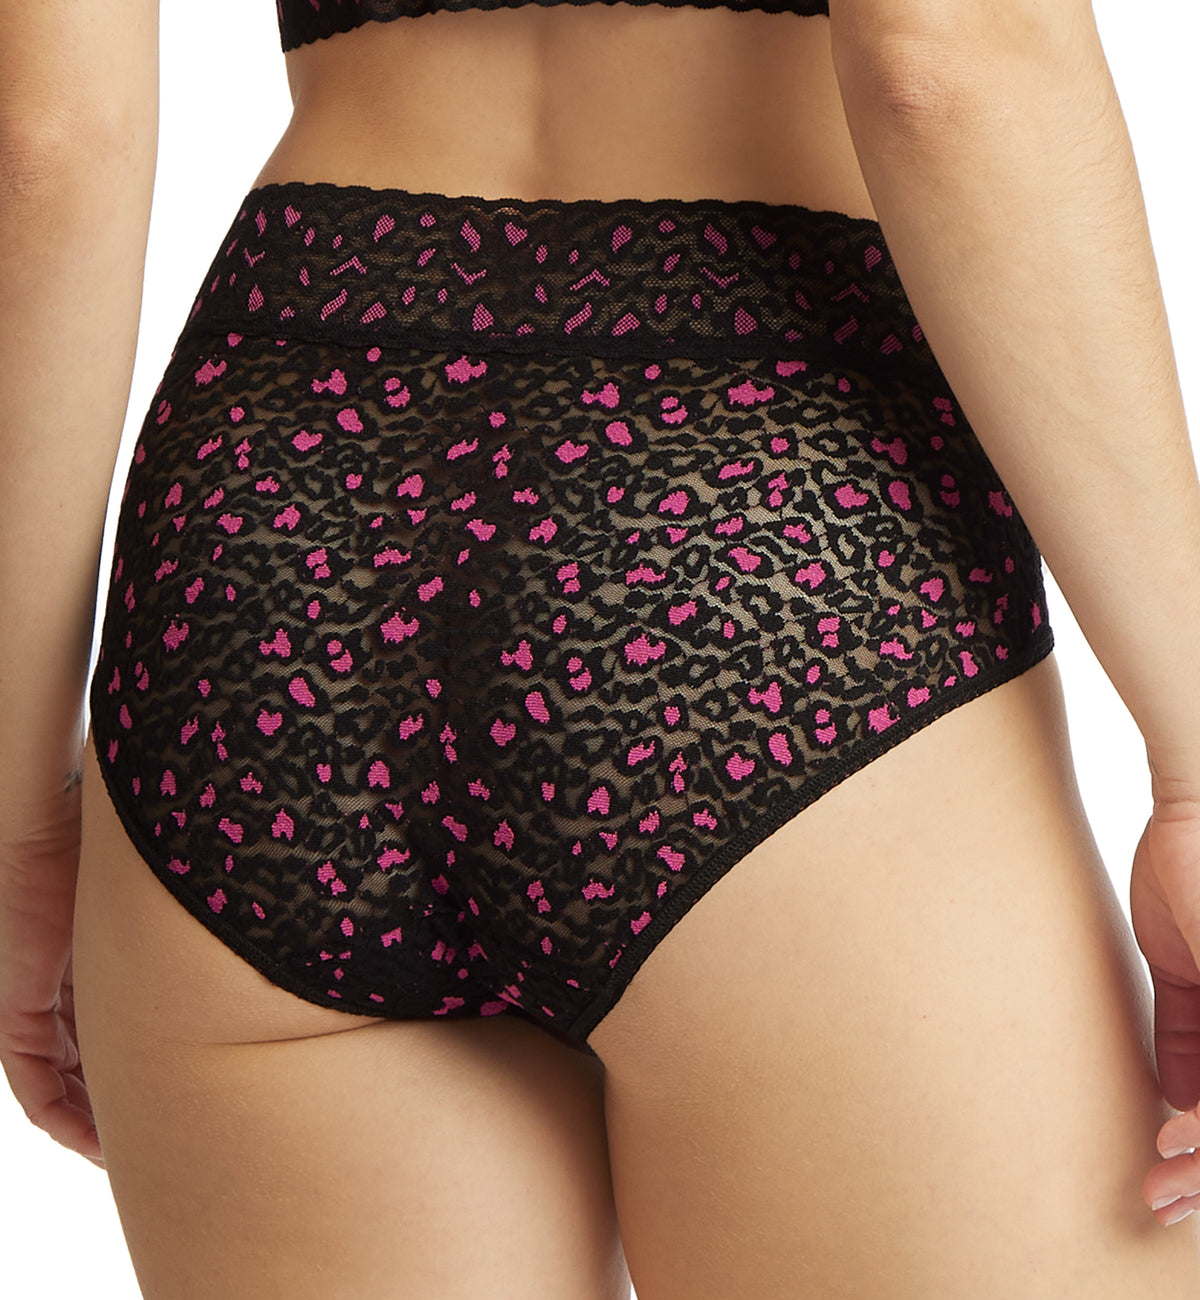 Hanky Panky Cross Dyed Leopard French Brief (7J2461),Small,Black/Tulip Pink - Black/Tulip Pink,Small